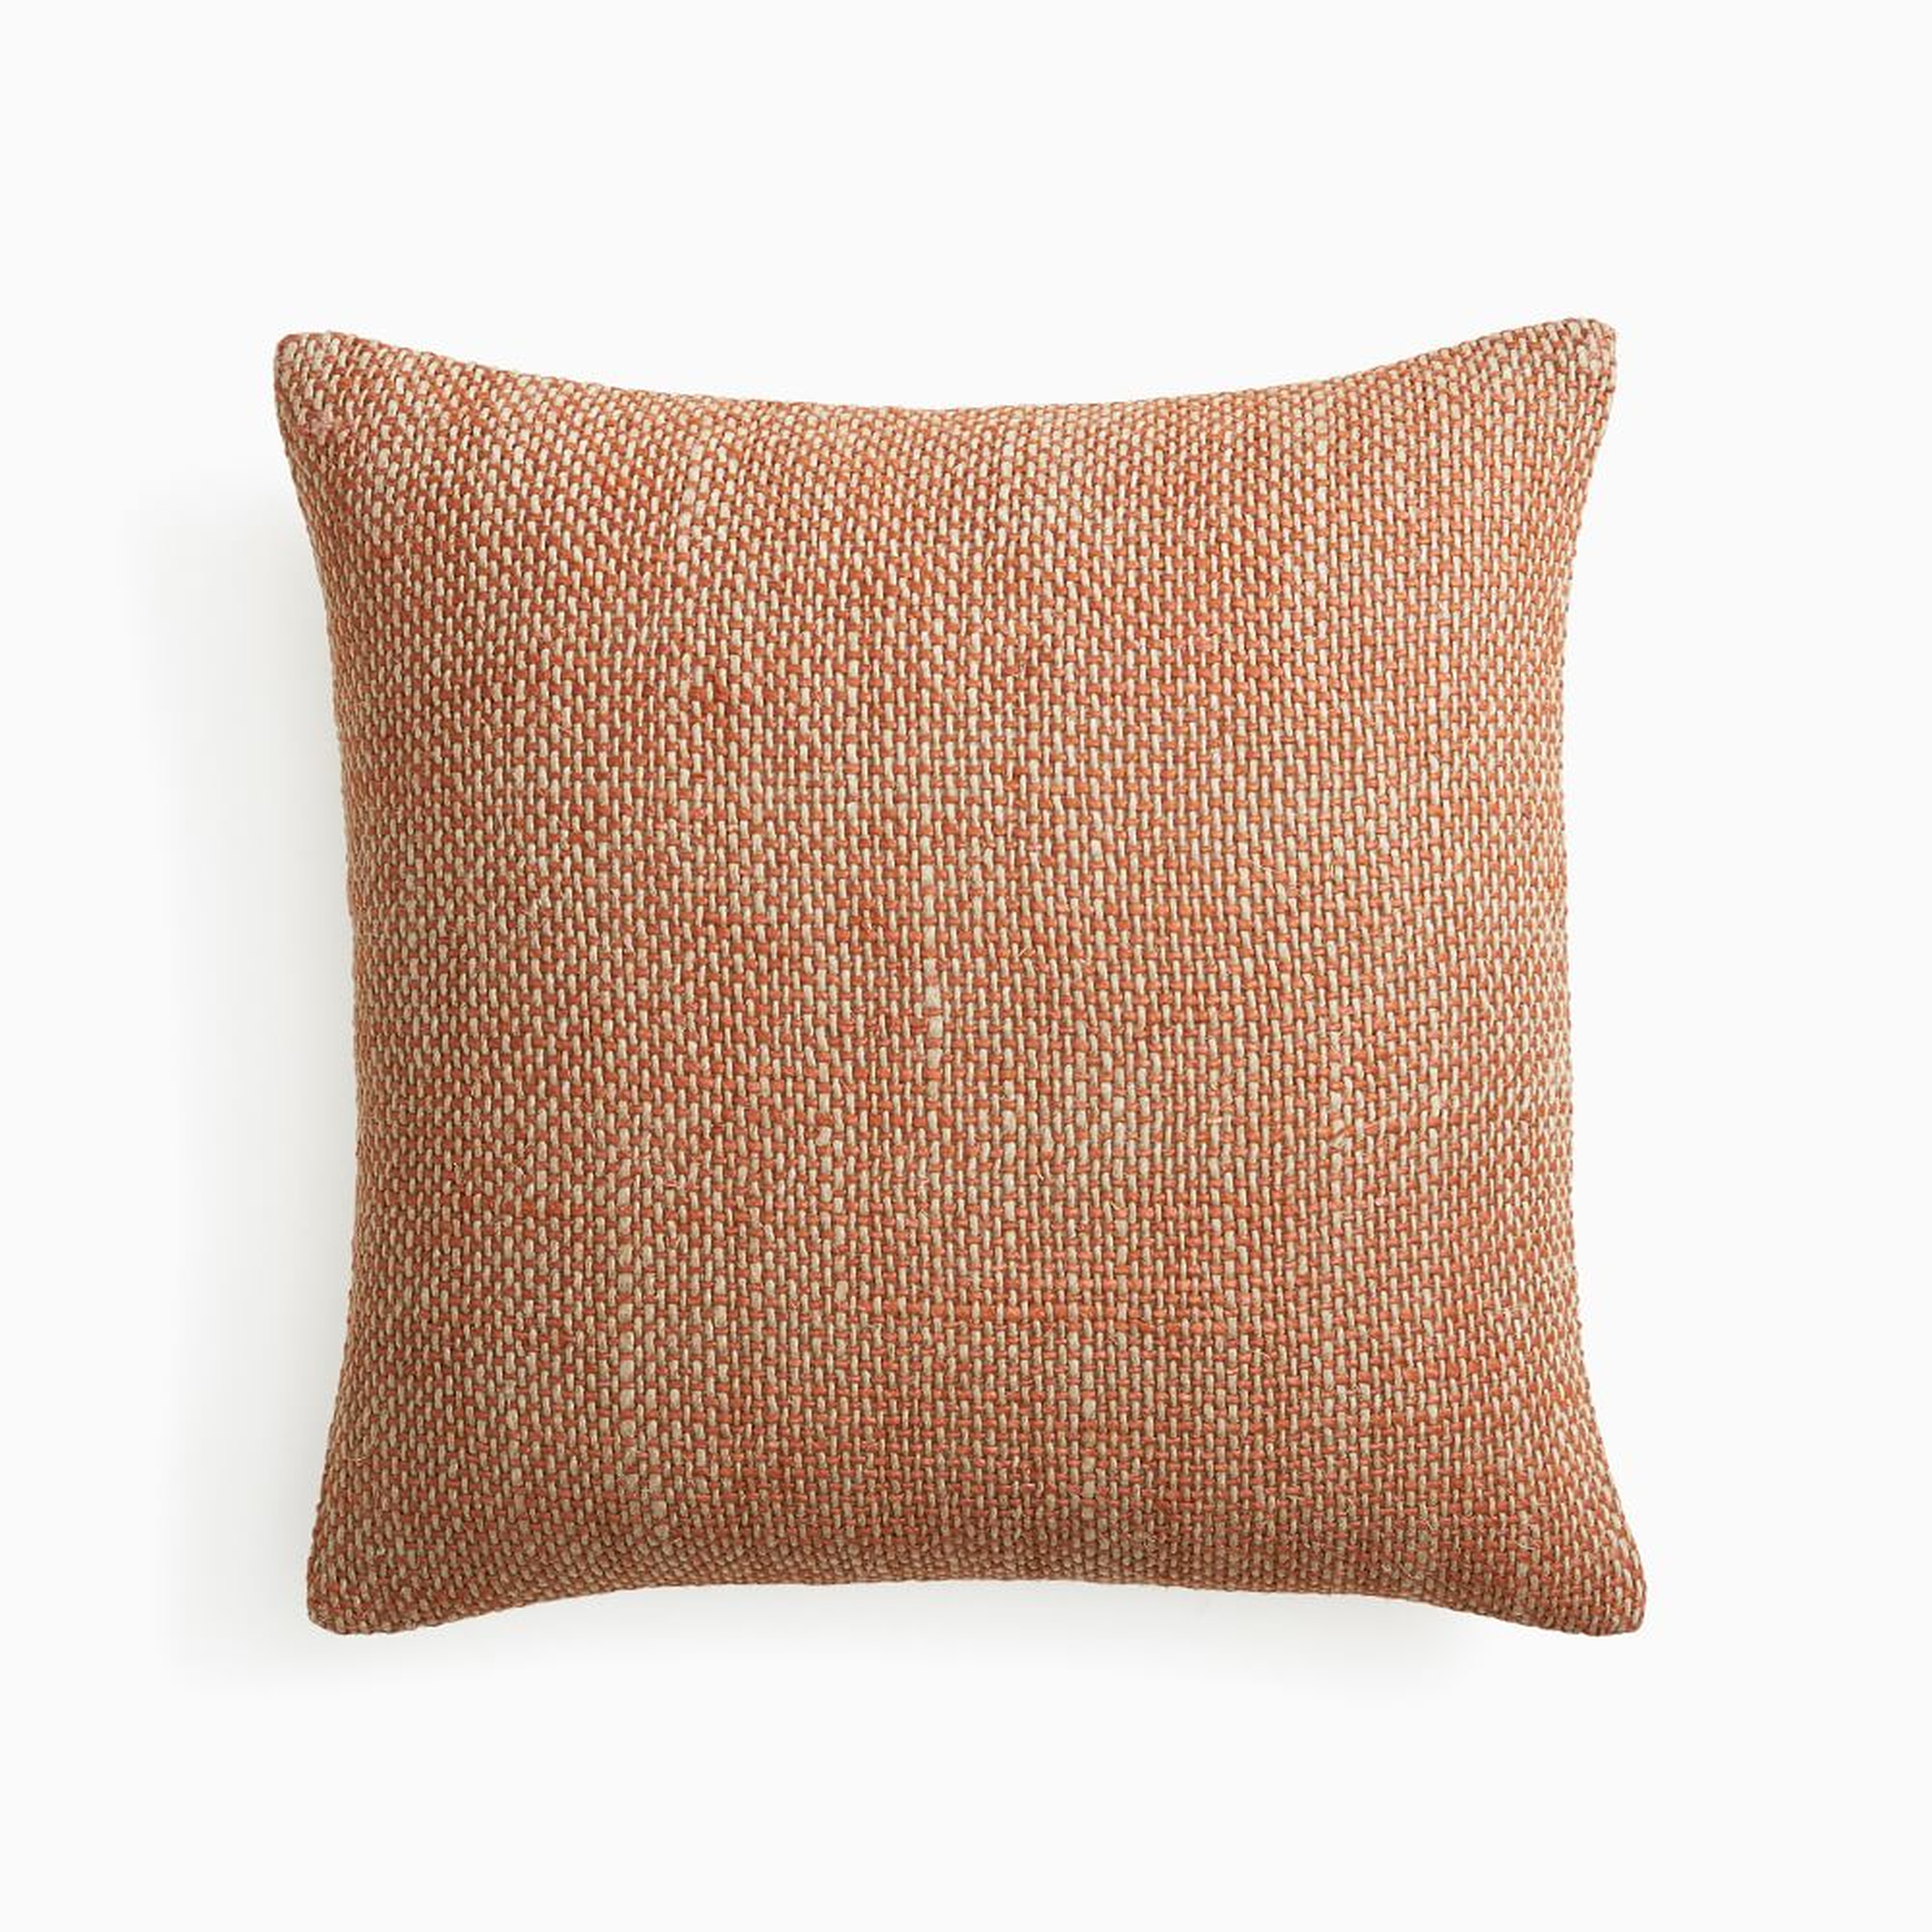 Two Tone Chunky Linen Pillow Cover, 20"x20", Copper, Set of 2 - West Elm